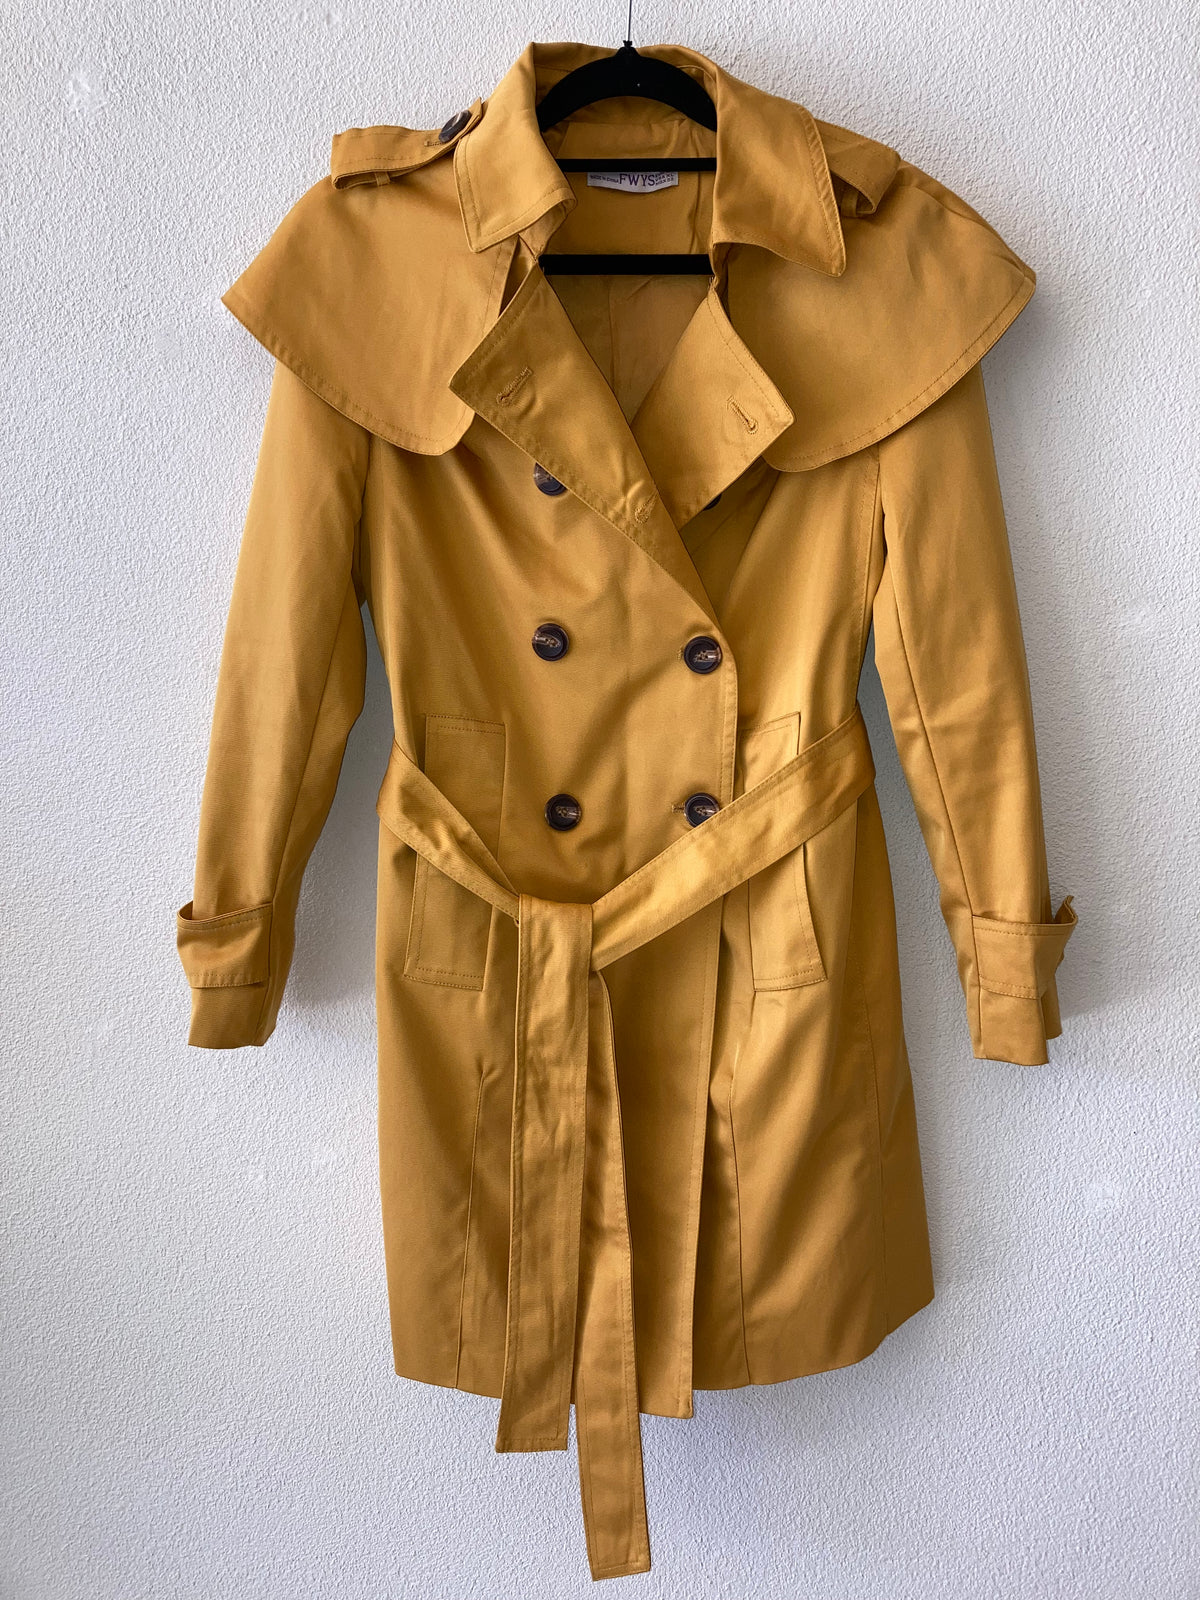 FWYS Mustard Trench Coat 6-8 6